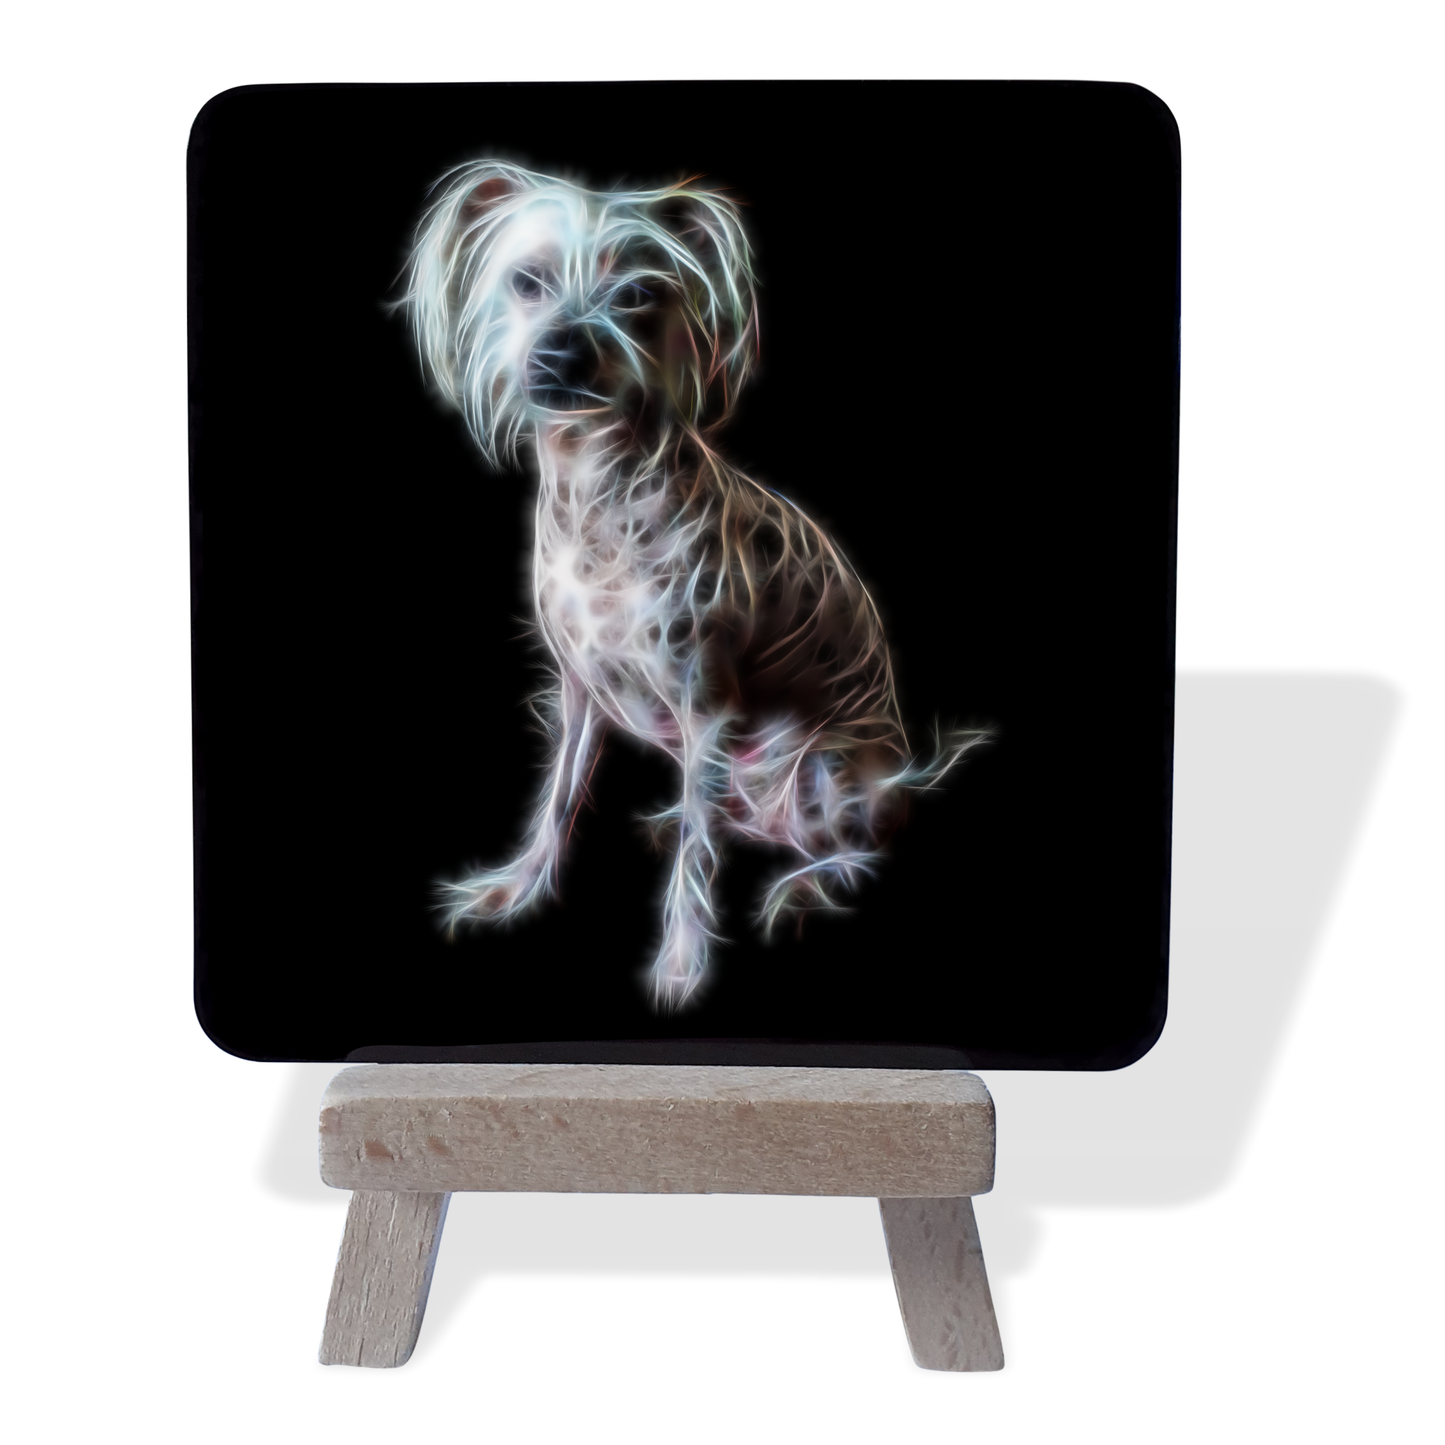 Chinese Crested #2 Metal Plaque and Mini Easel with Fractal Art Design